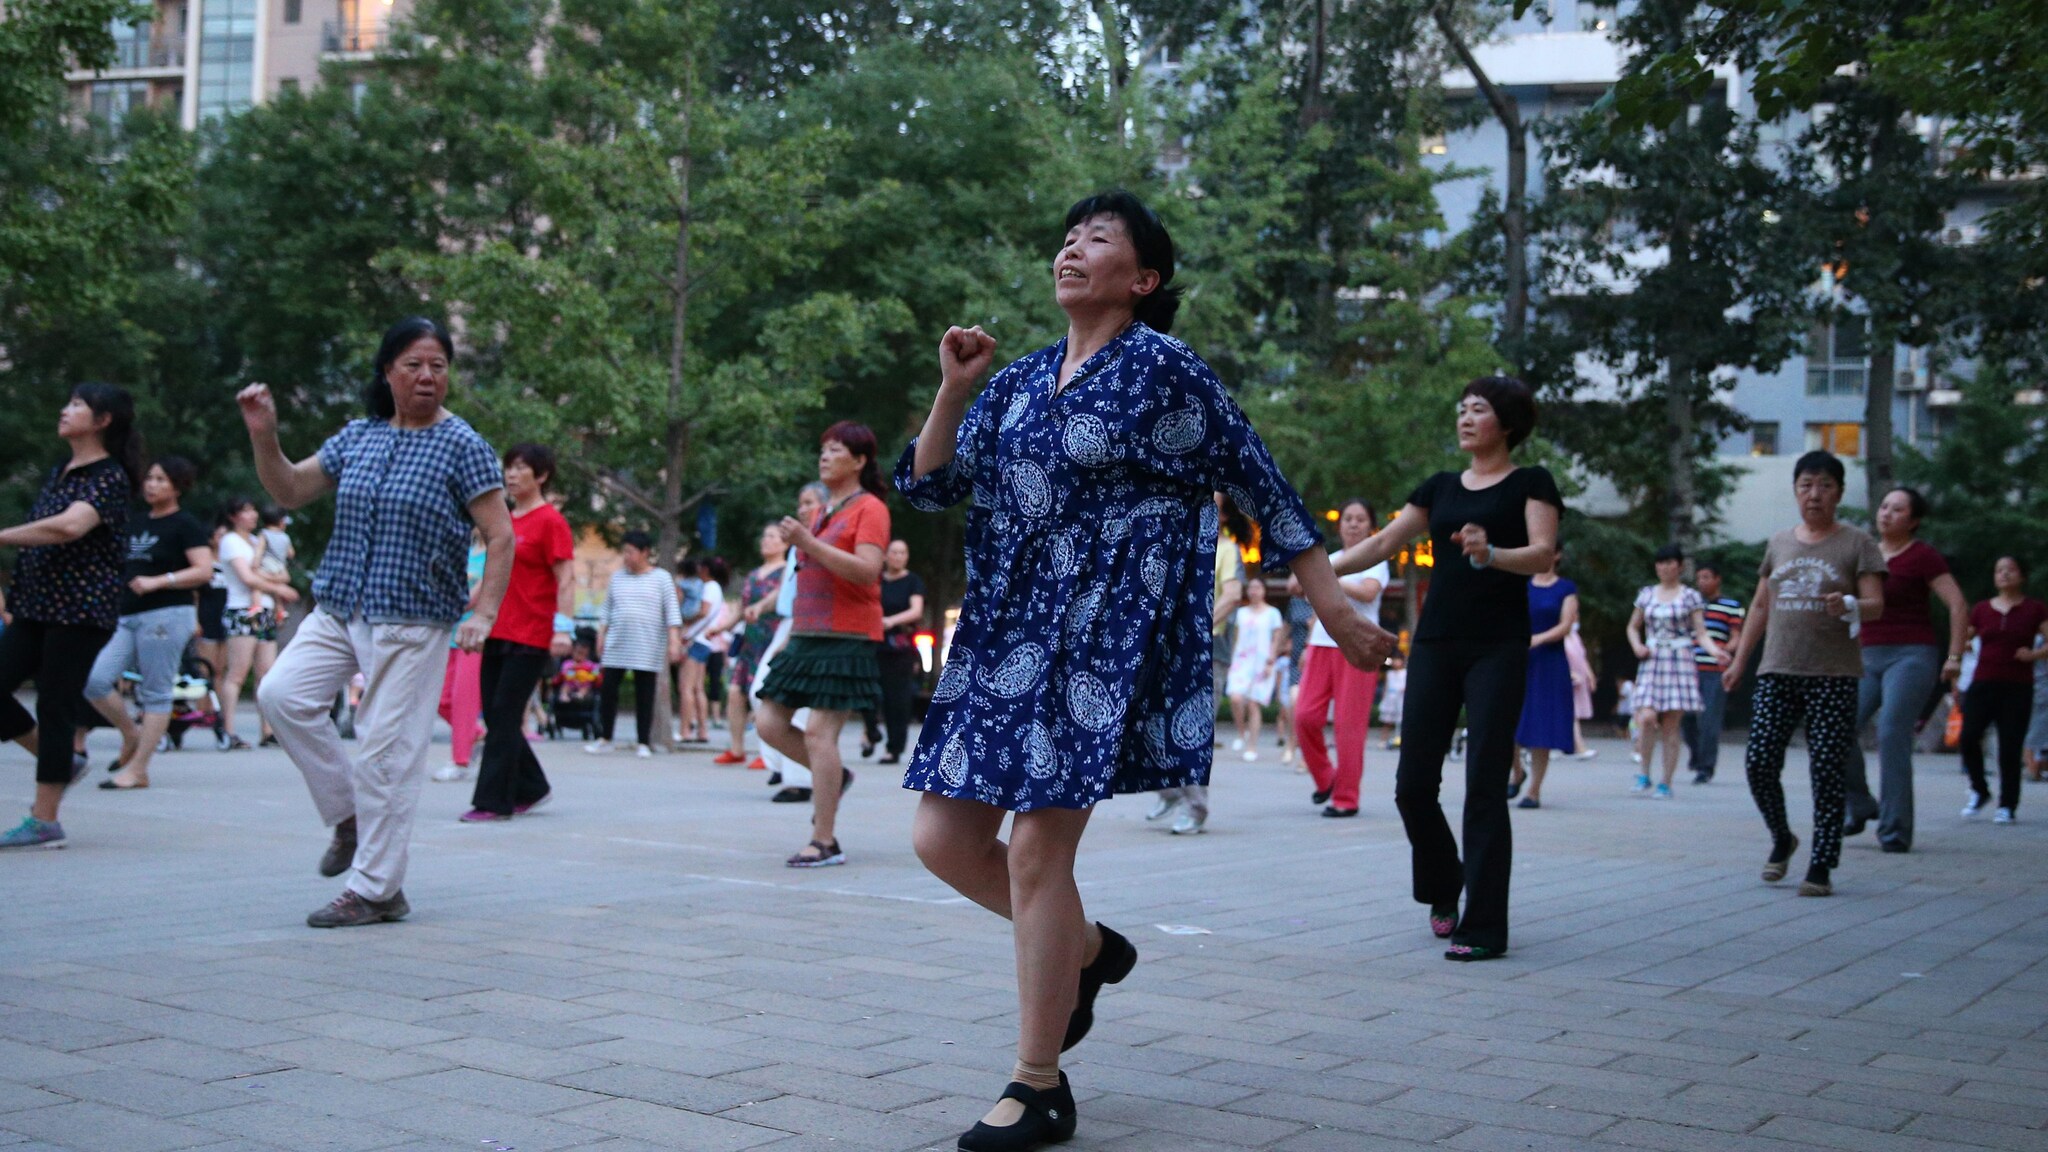 The remote control must silence the dancing grandmothers of China